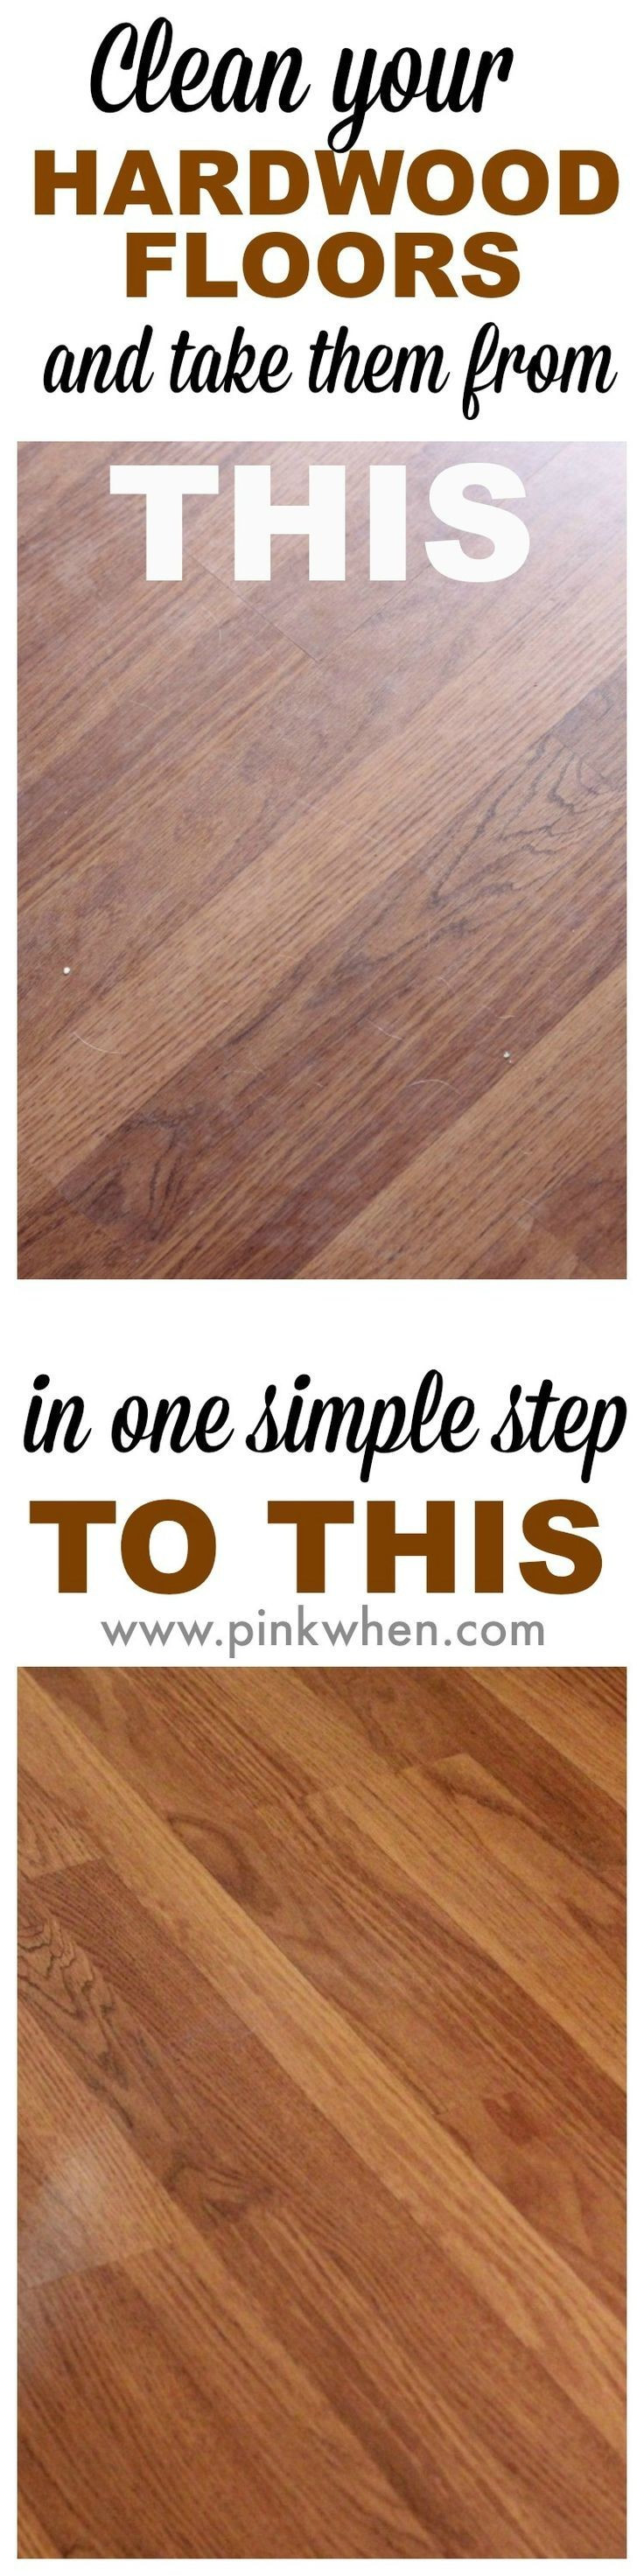 30 Fantastic Hardwood Floor Cleaning solution 2024 free download hardwood floor cleaning solution of 17 awesome what to use to clean hardwood floors image dizpos com regarding what to use to clean hardwood floors awesome what do you clean hardwood floors 